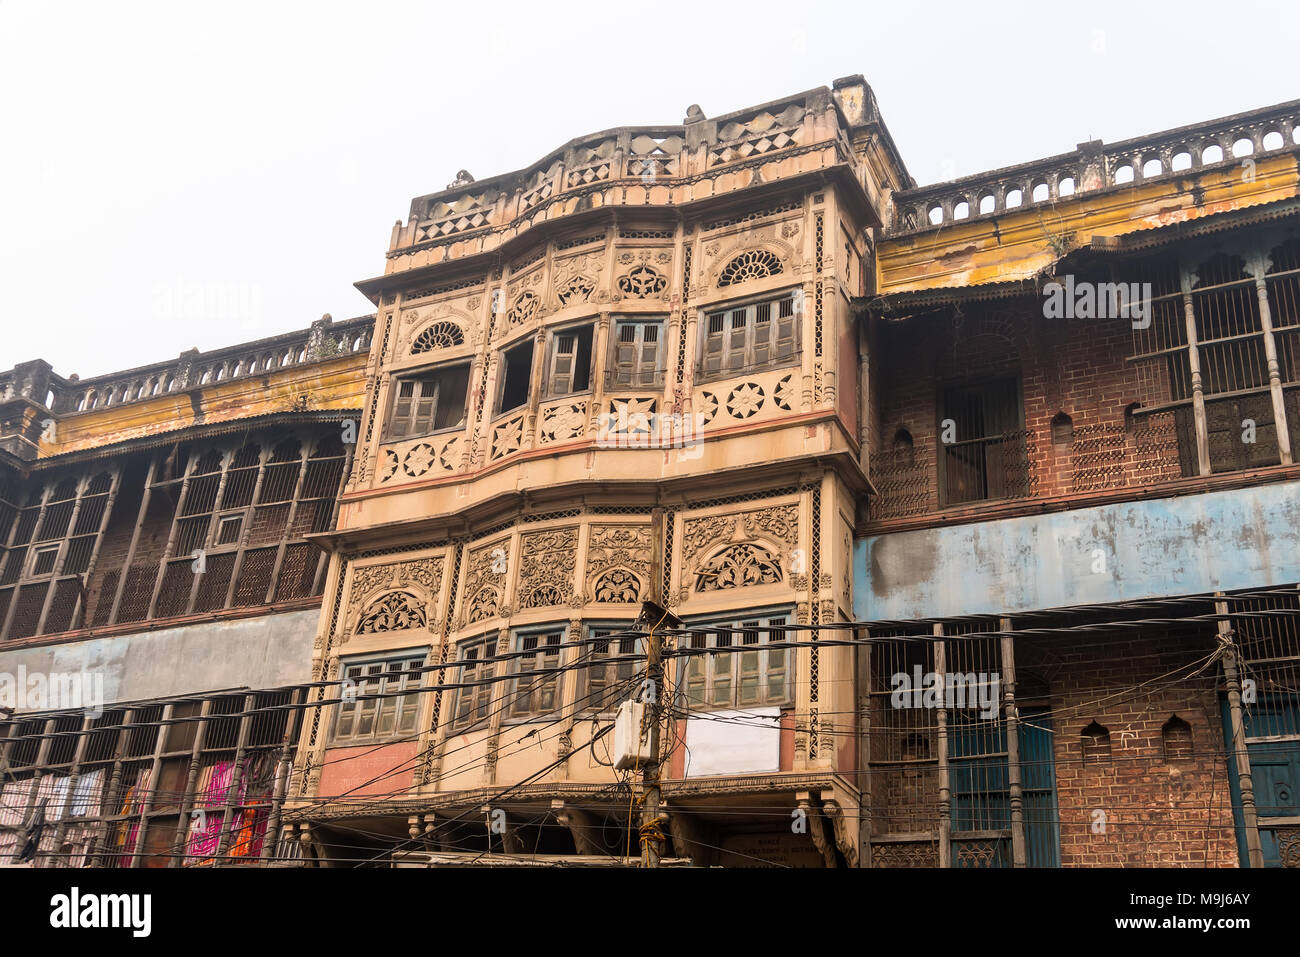 Old balcony in the old building. Beautiful Architecture of the old Holy city of Haridwar. Stock Photo